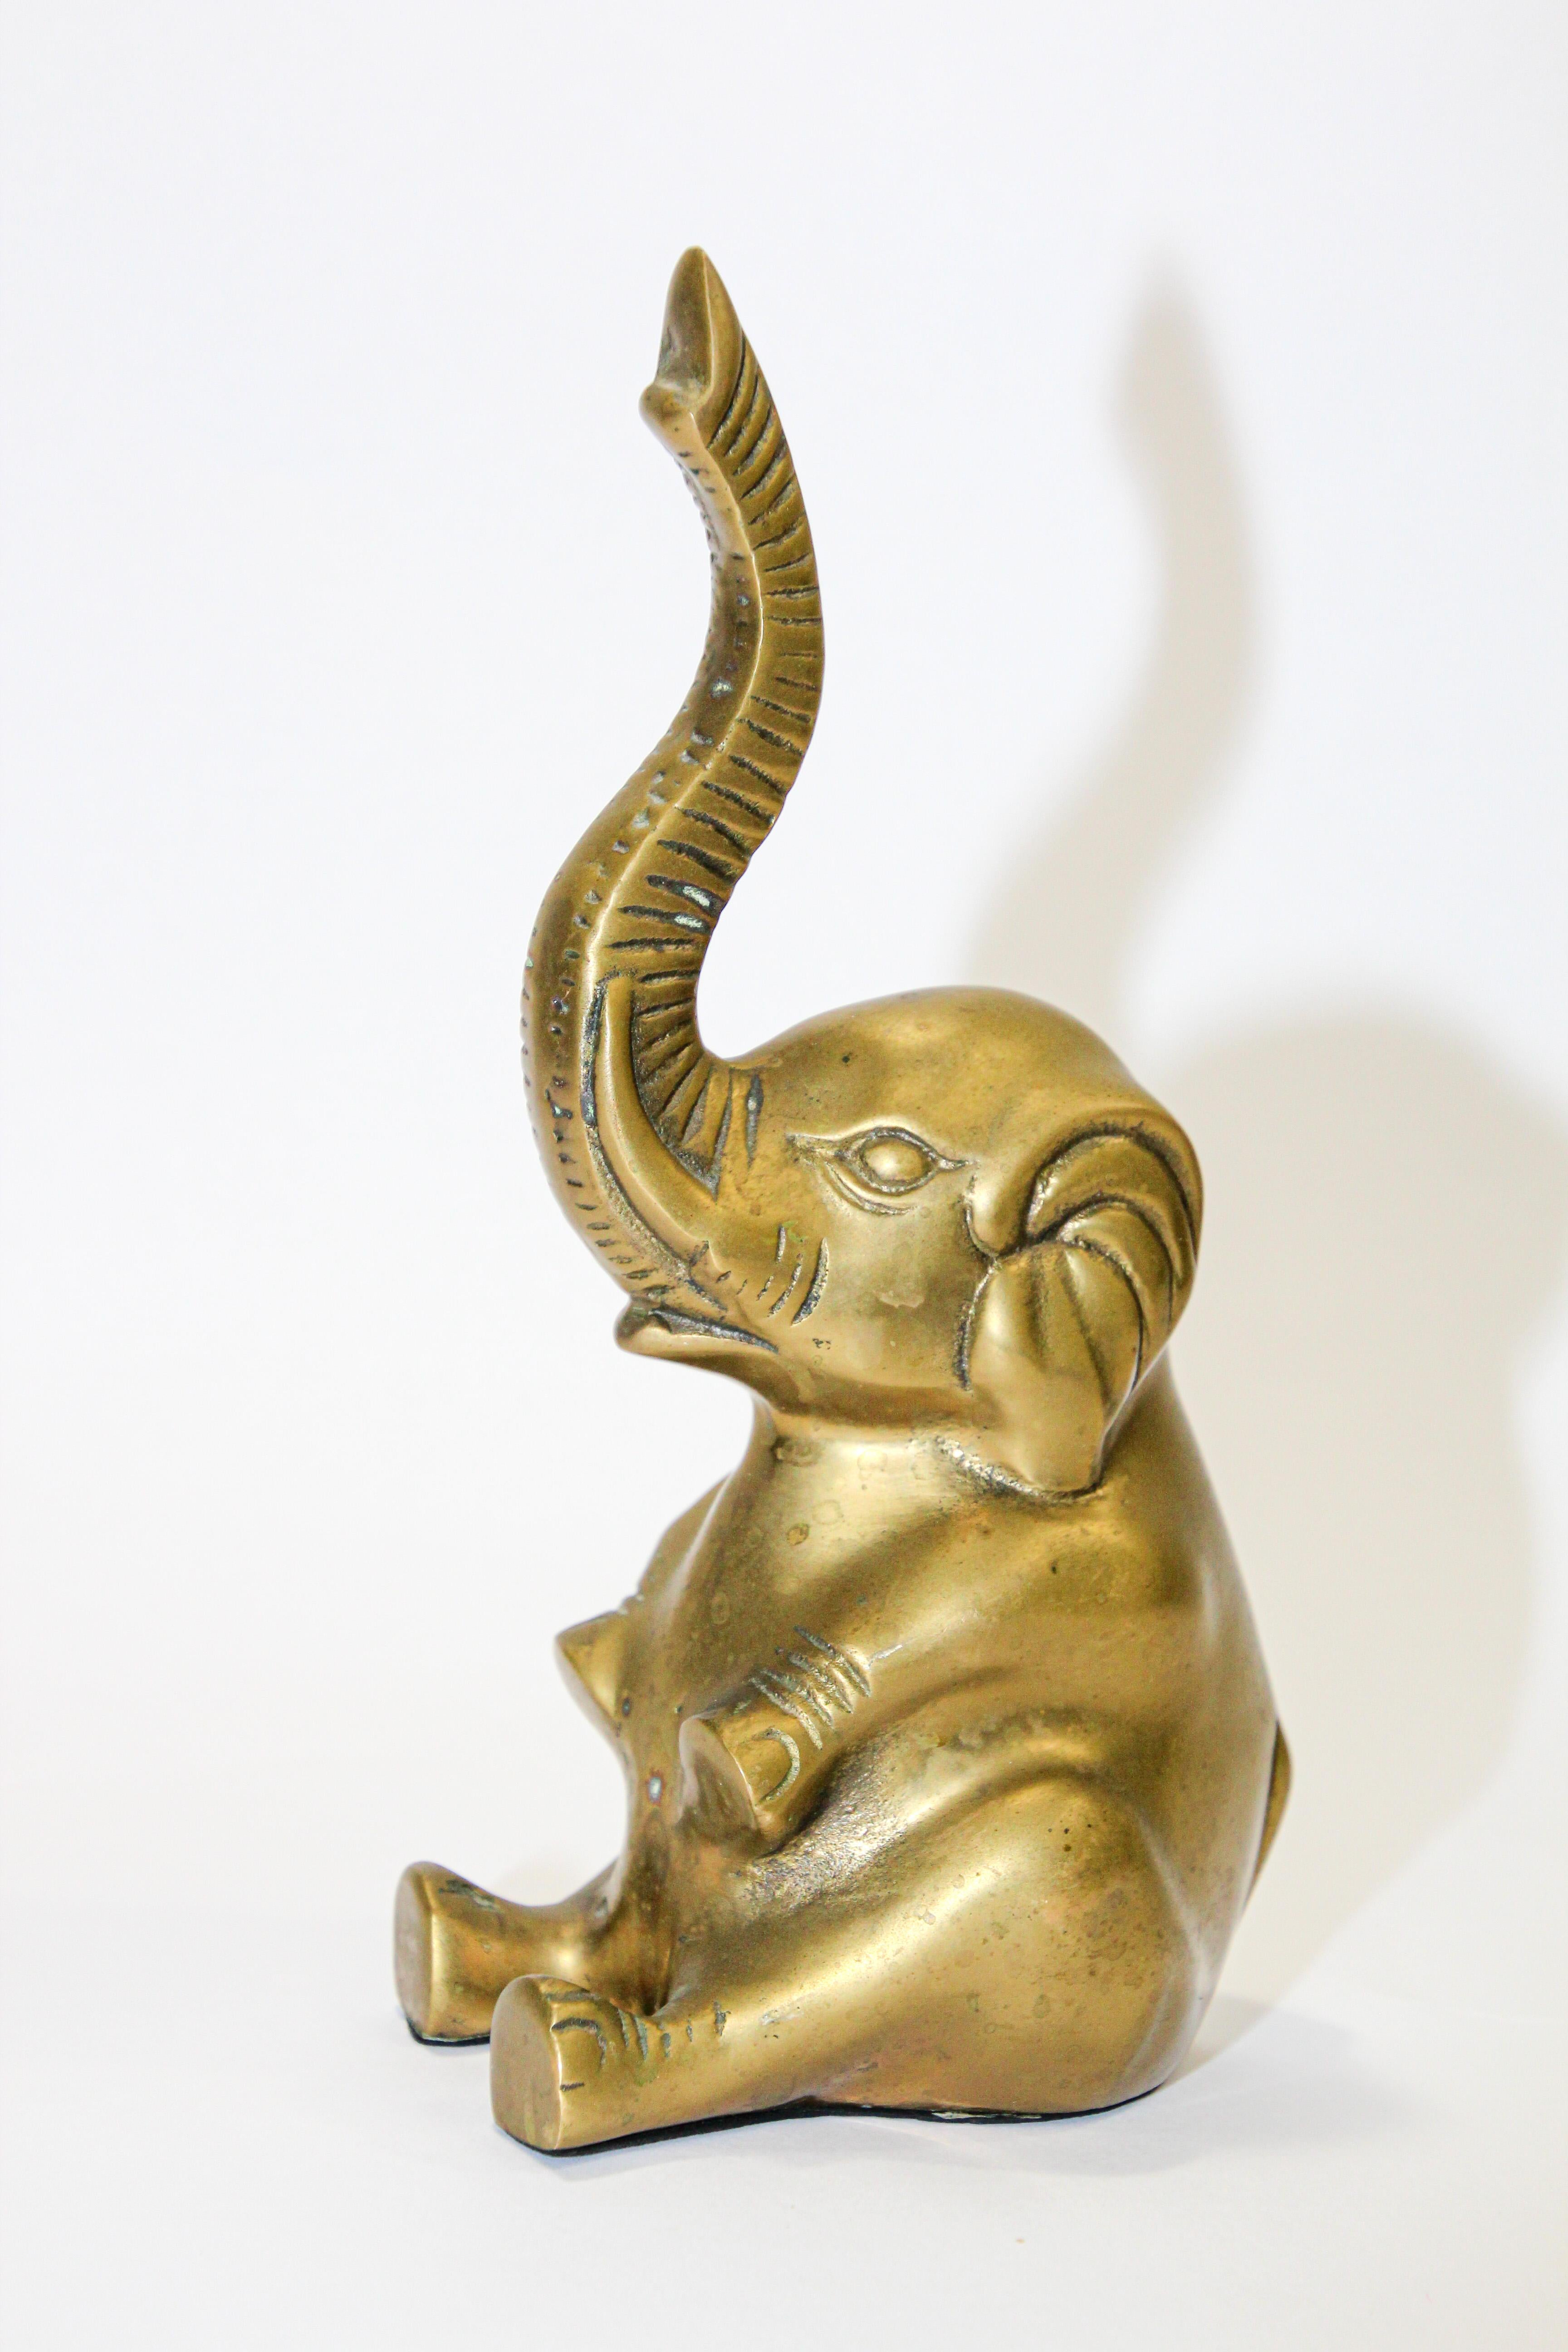 Vintage cast solid polished brass elephant sculpture paper weight.
The elephant is seated and a trunk is up for good luck.
Dimensions: 4.5